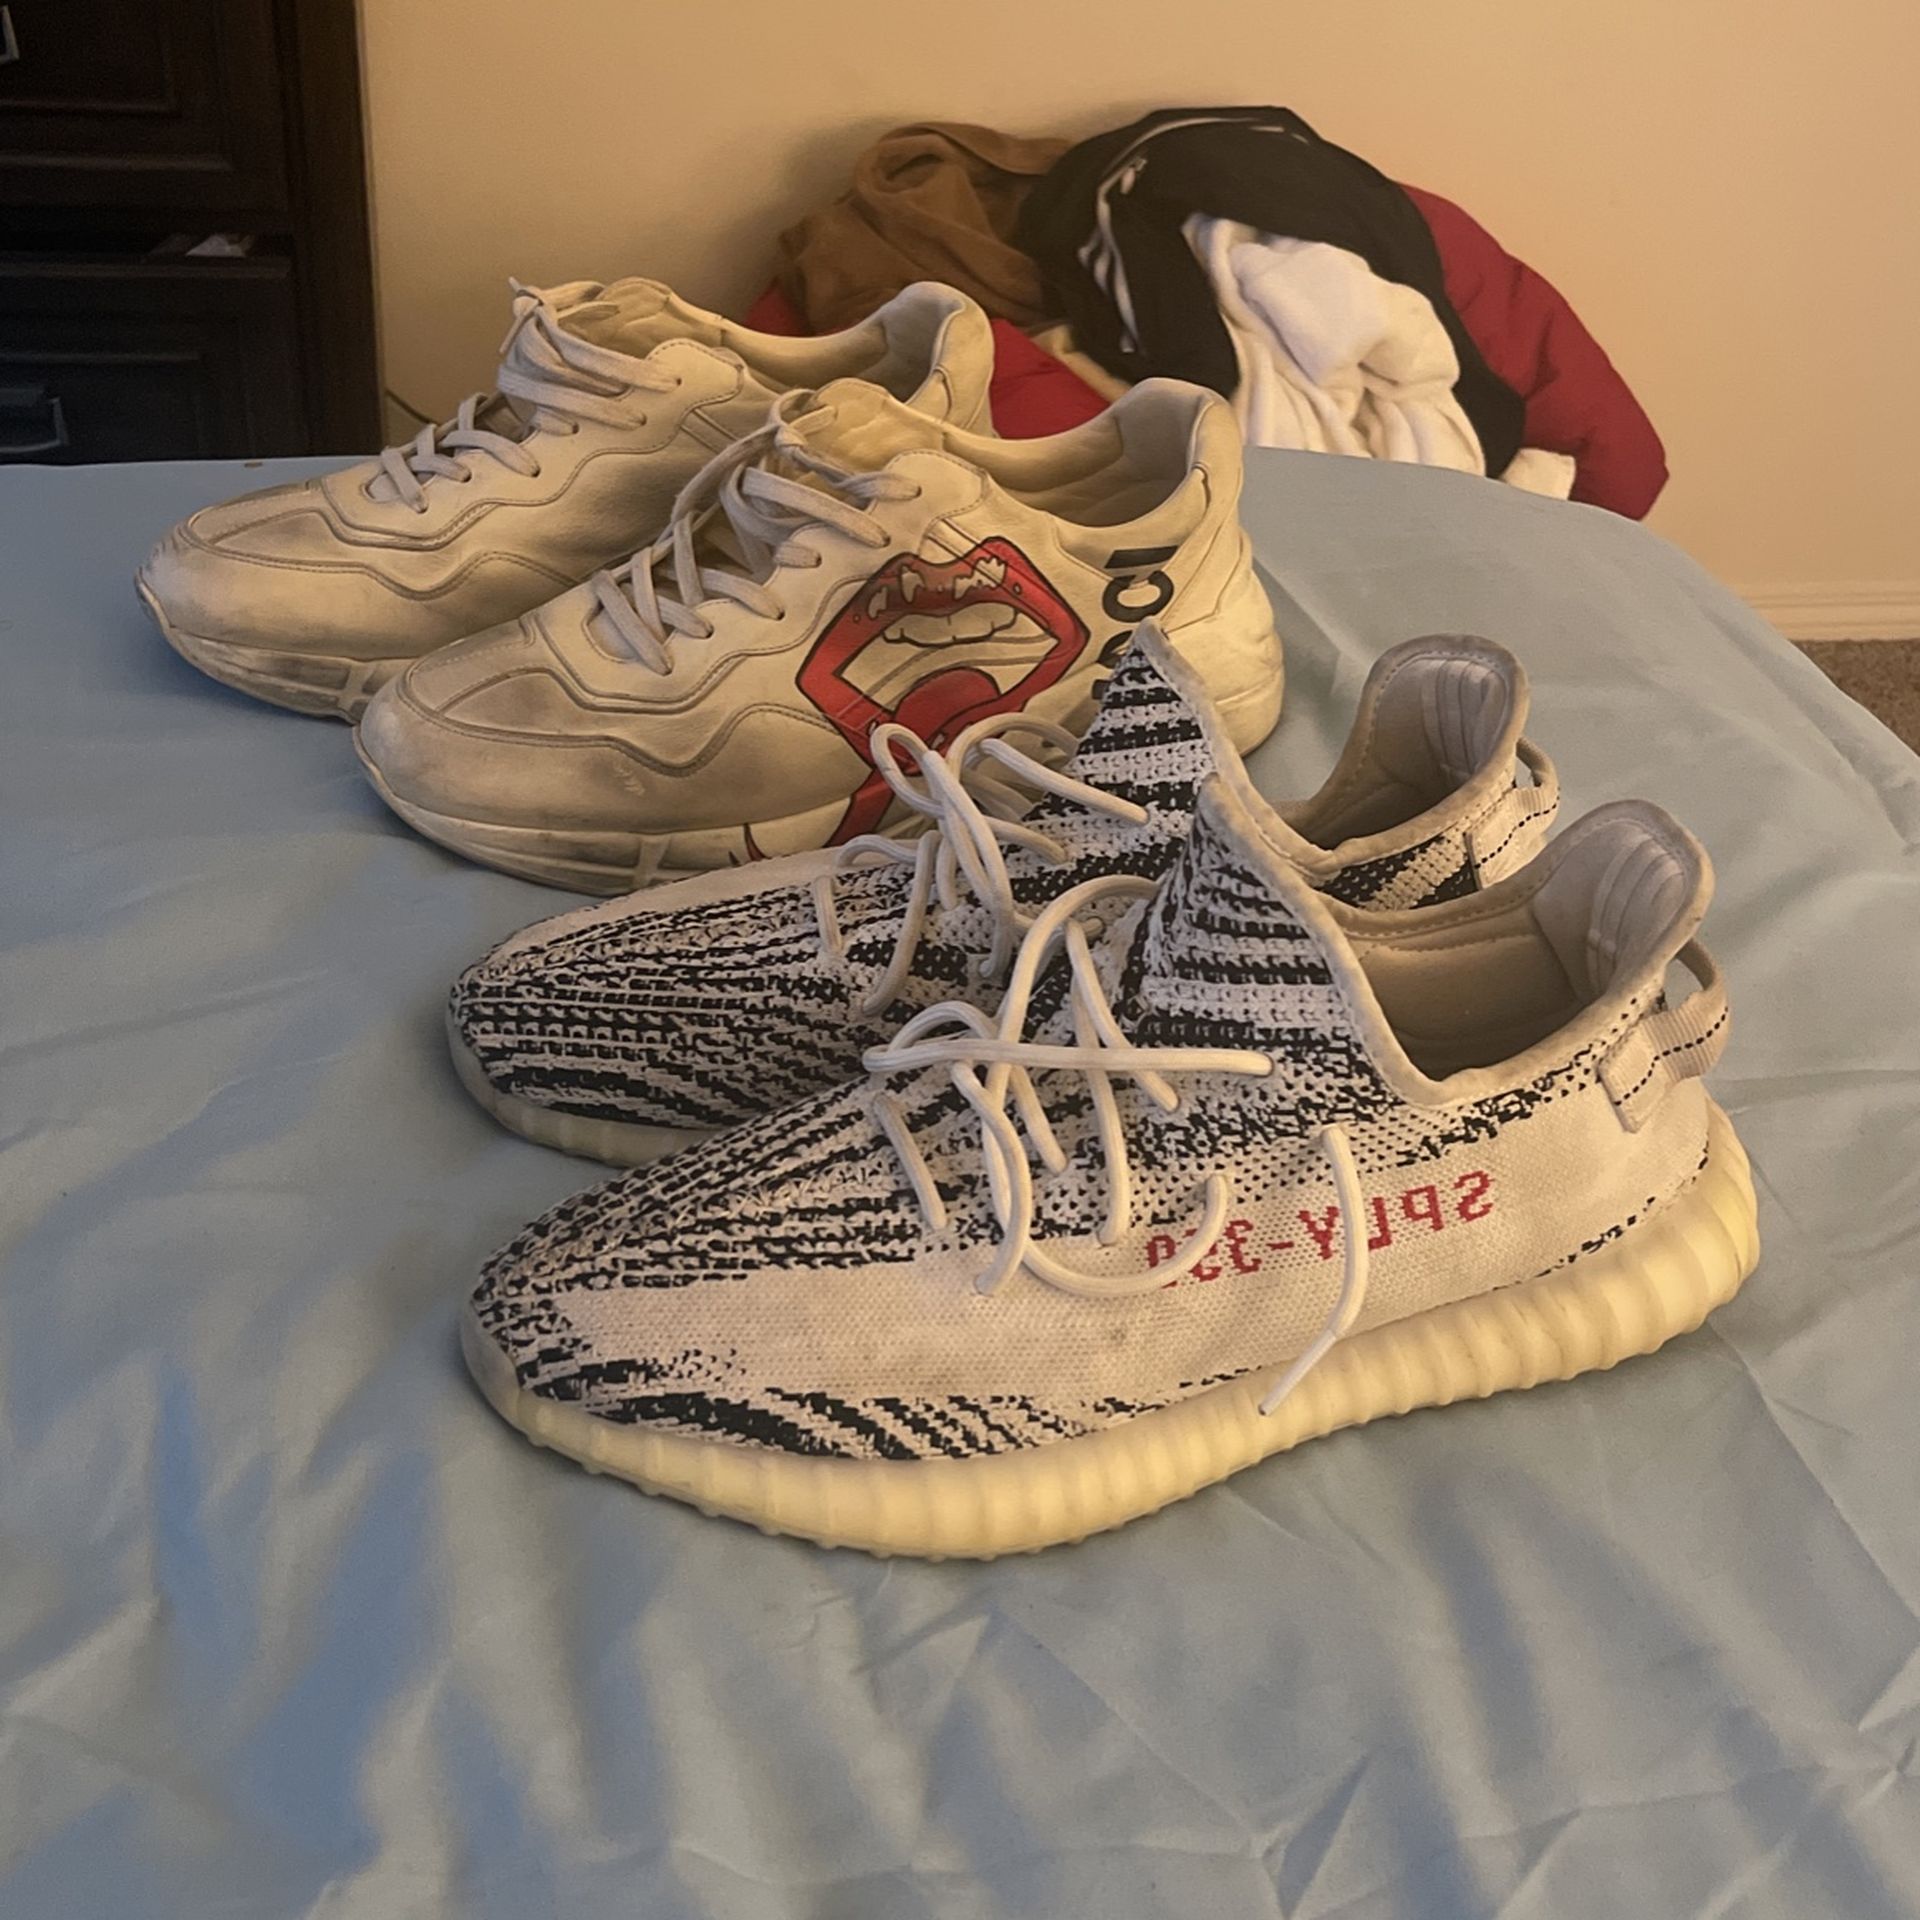 Size 13 Gucci Shoes Size 14 Yeezy Zebras for Sale in Angeles, - OfferUp